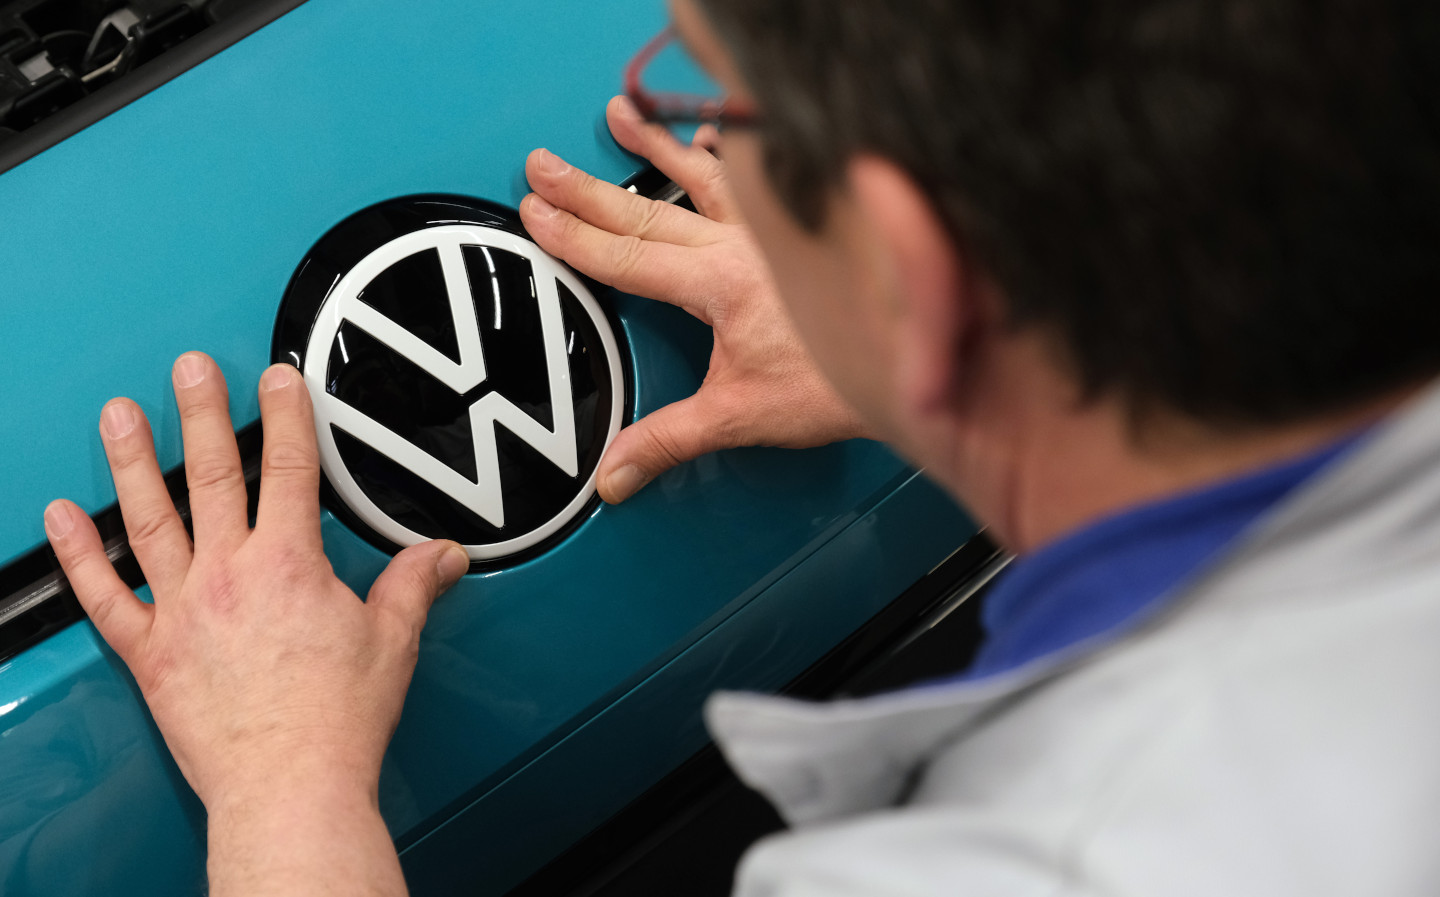 Volkswagen to change name to "Voltswagen" in America